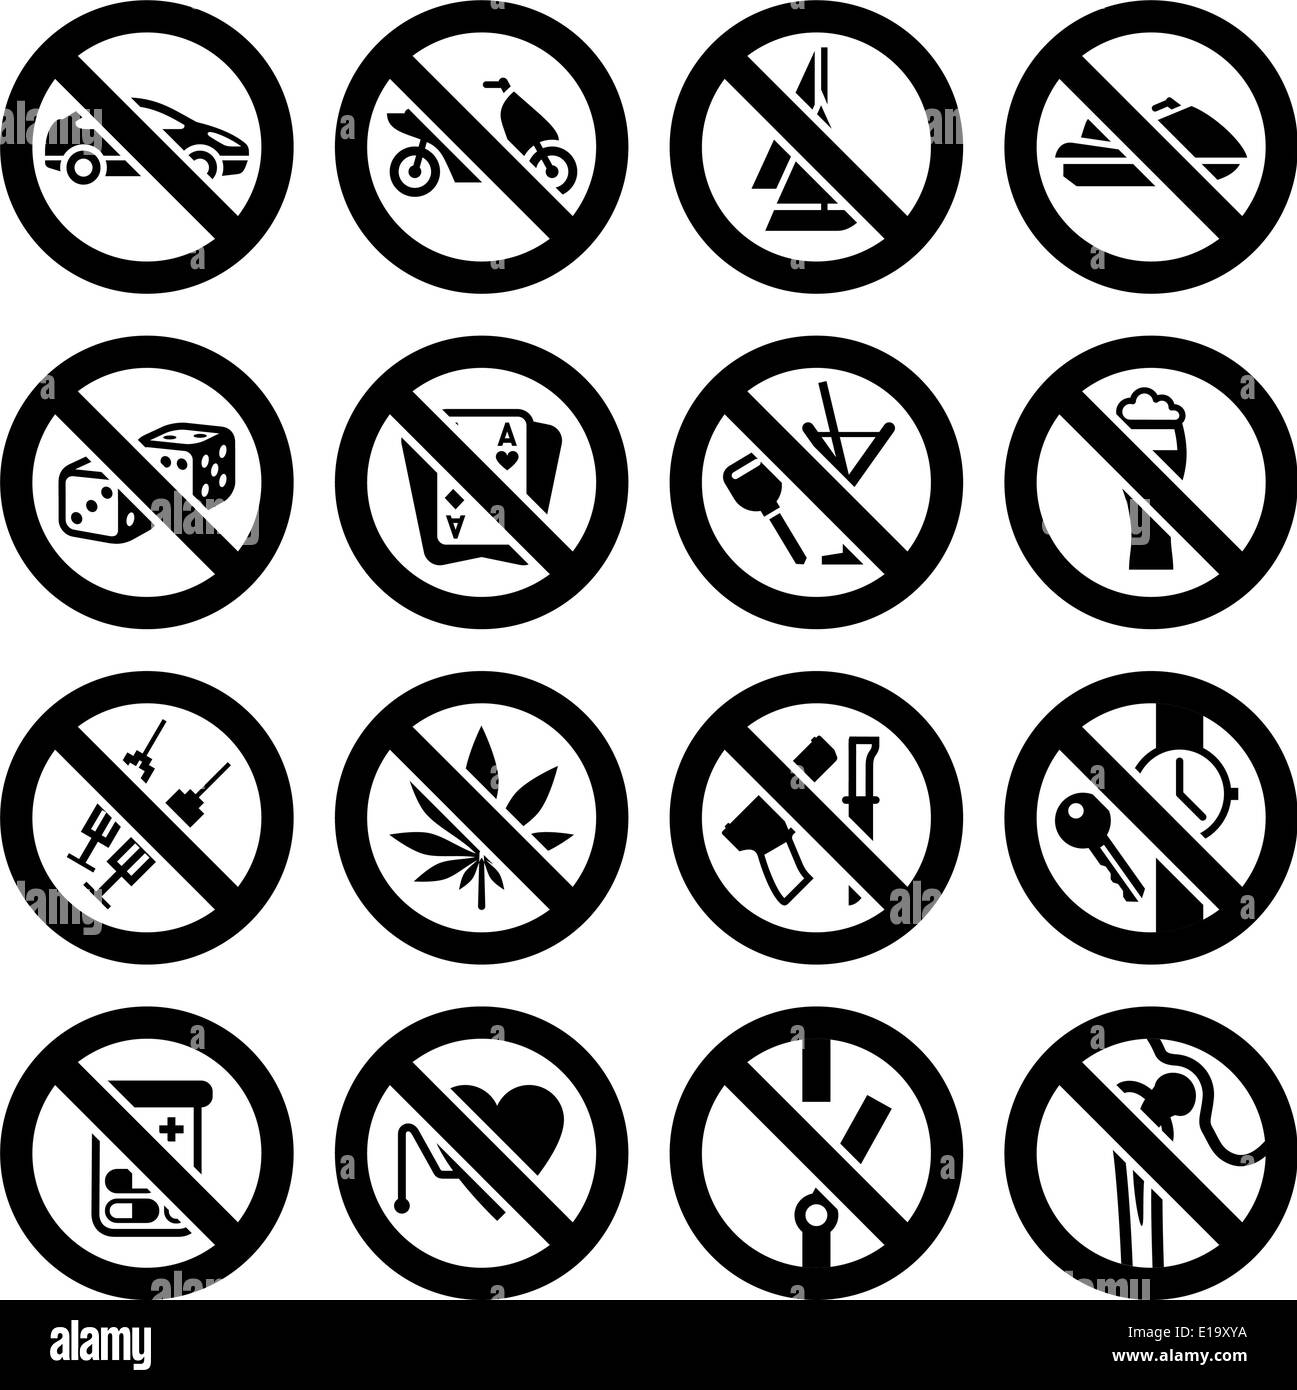 Set icons, prohibited signs black, vector symbols Stock Vector